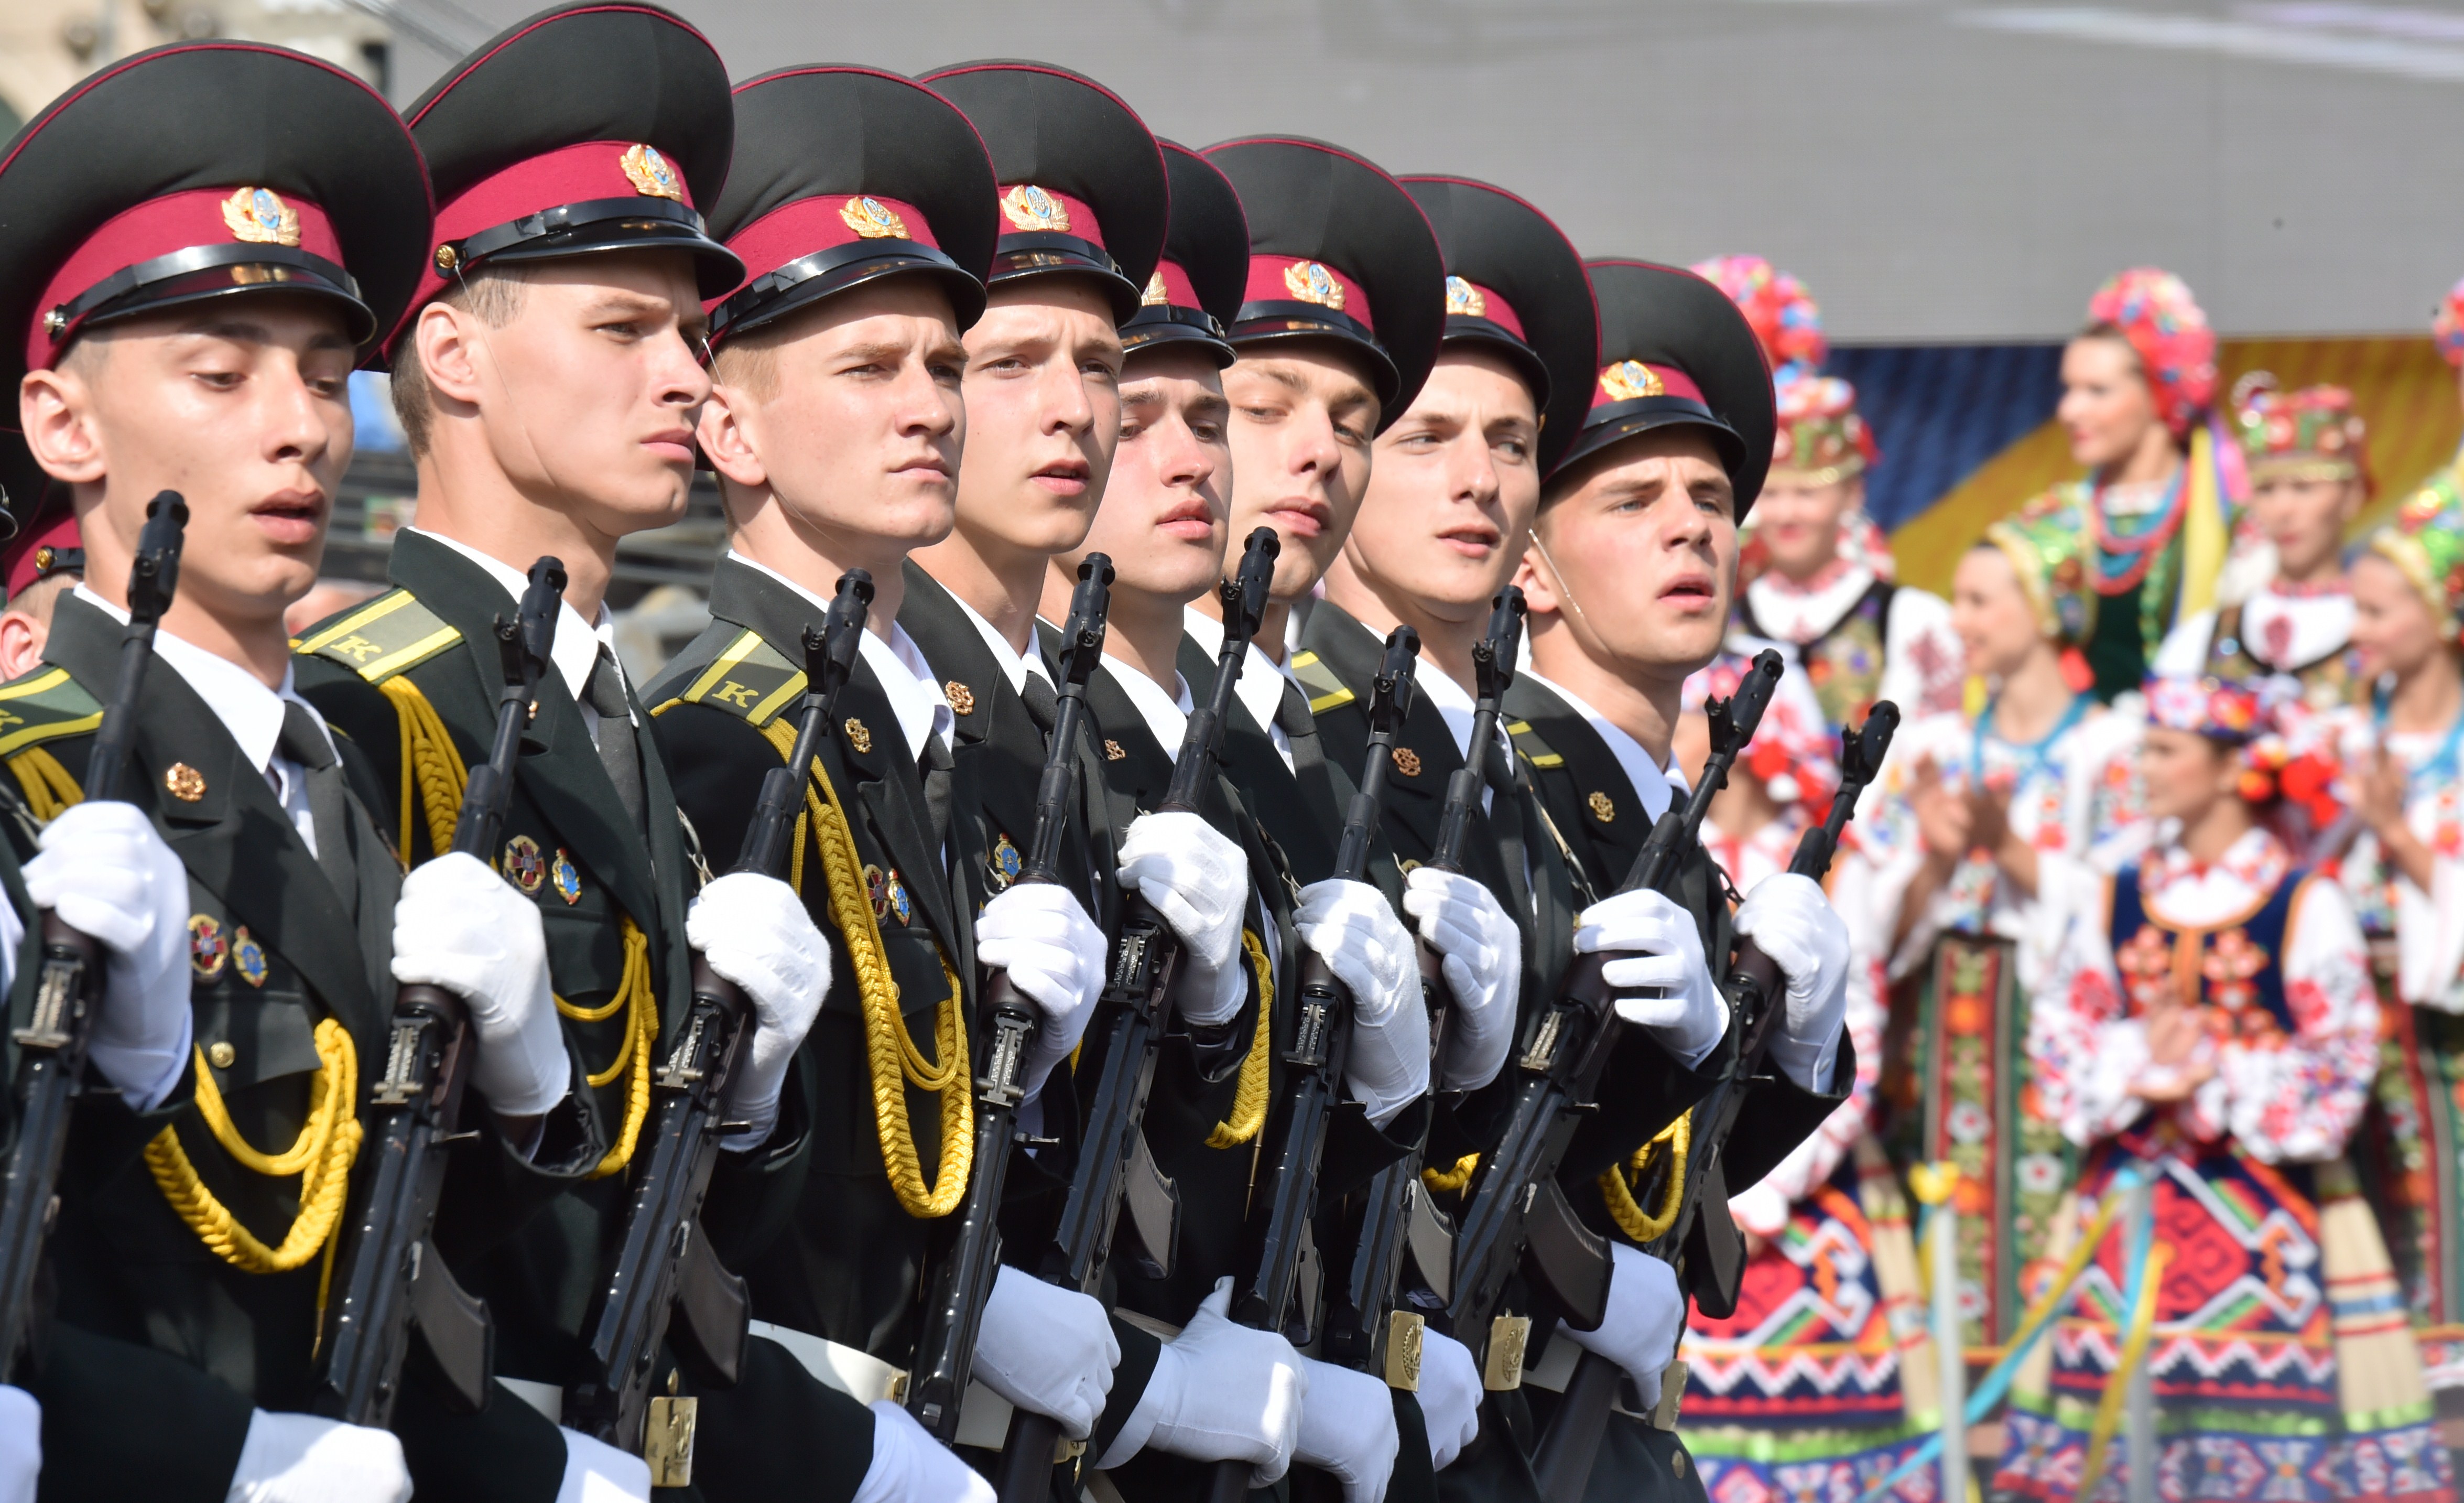 Ukrainian forces parade during a military ceremony marking the 23rd anniversary of Ukraine's independence in Kiev on Aug. 24, 2014. 